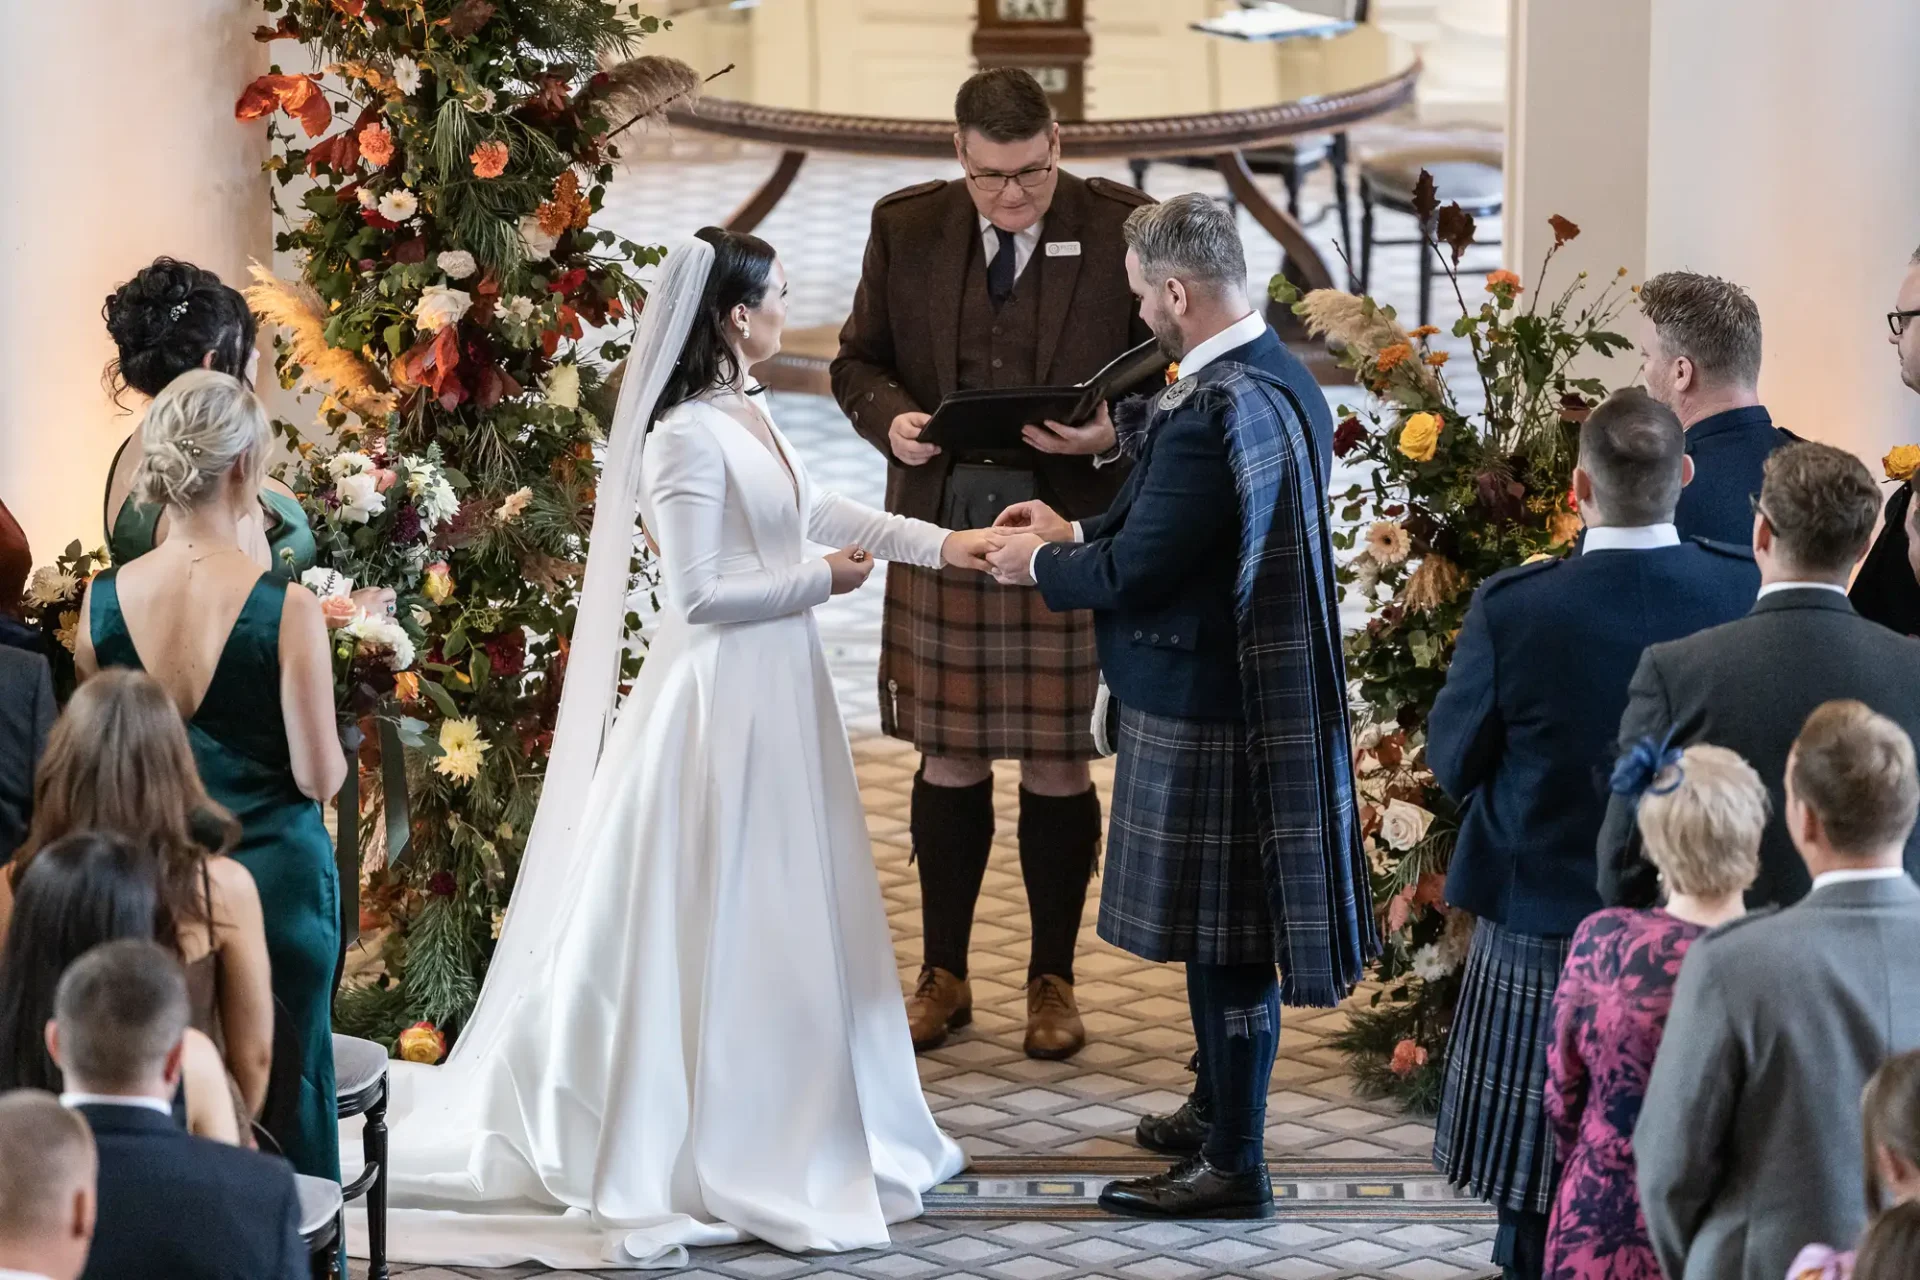 A bride and groom exchange vows, surrounded by guests and vibrant floral decorations in an elegant indoor setting, with the officiant and groom wearing traditional kilts.